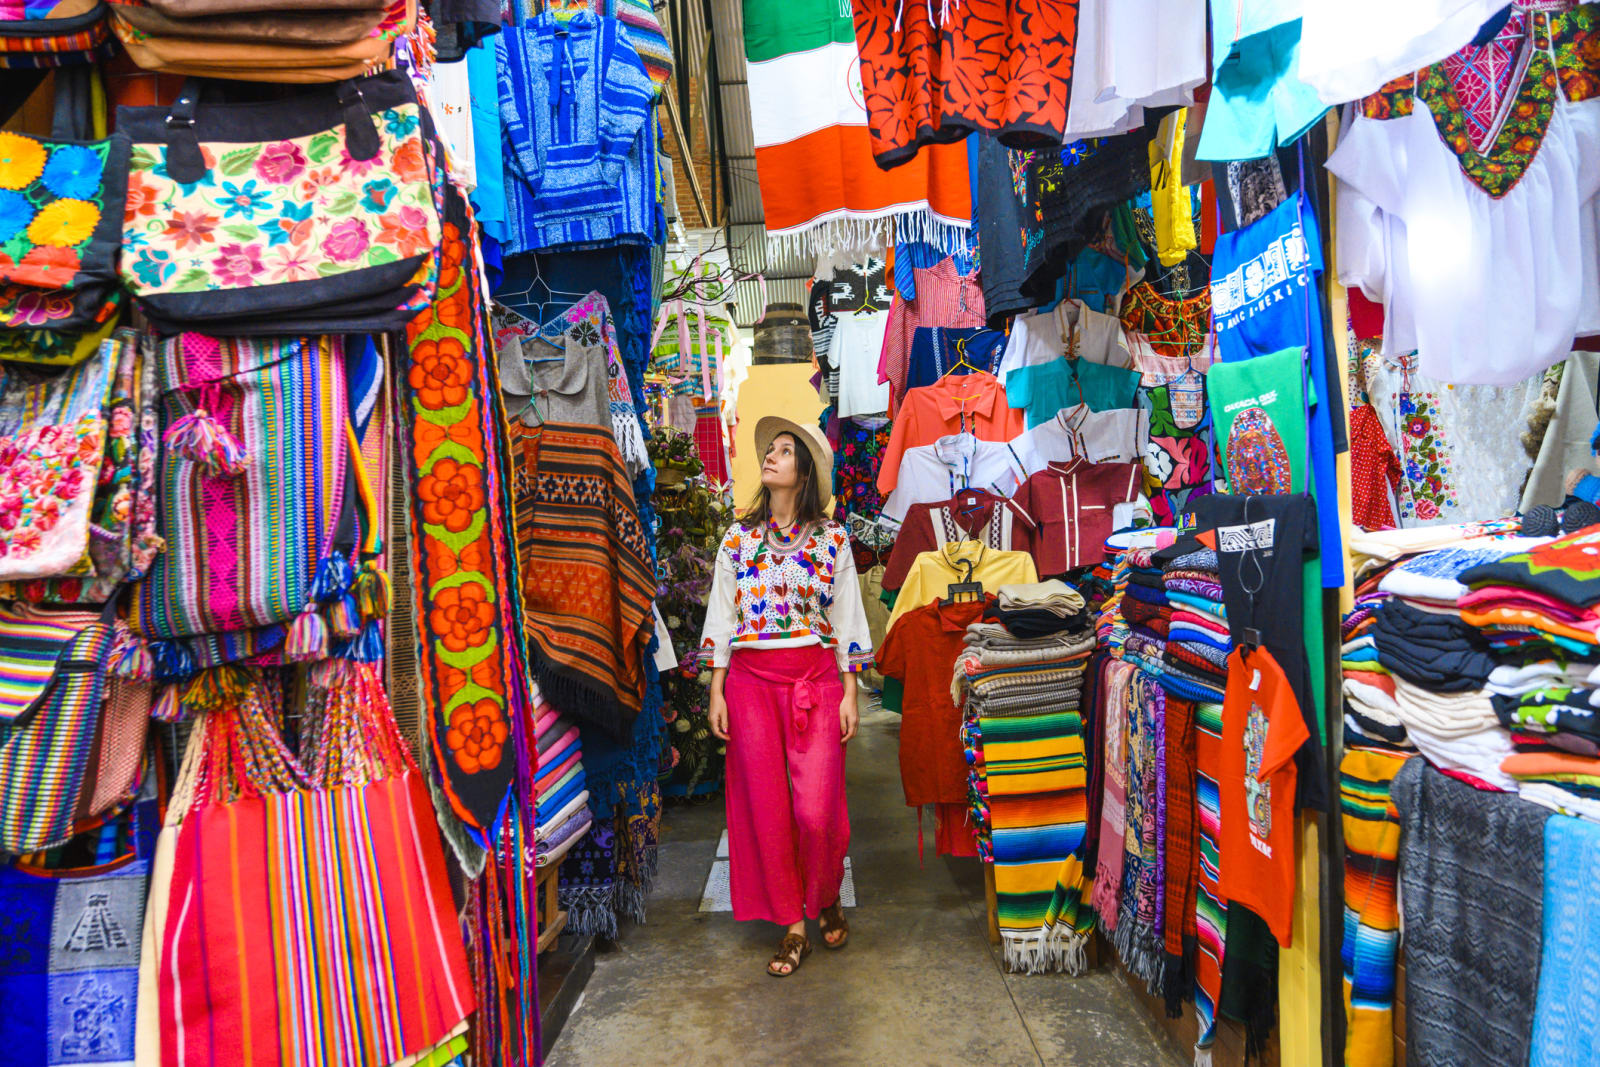 Lady walking through a market with colourful items in mexico